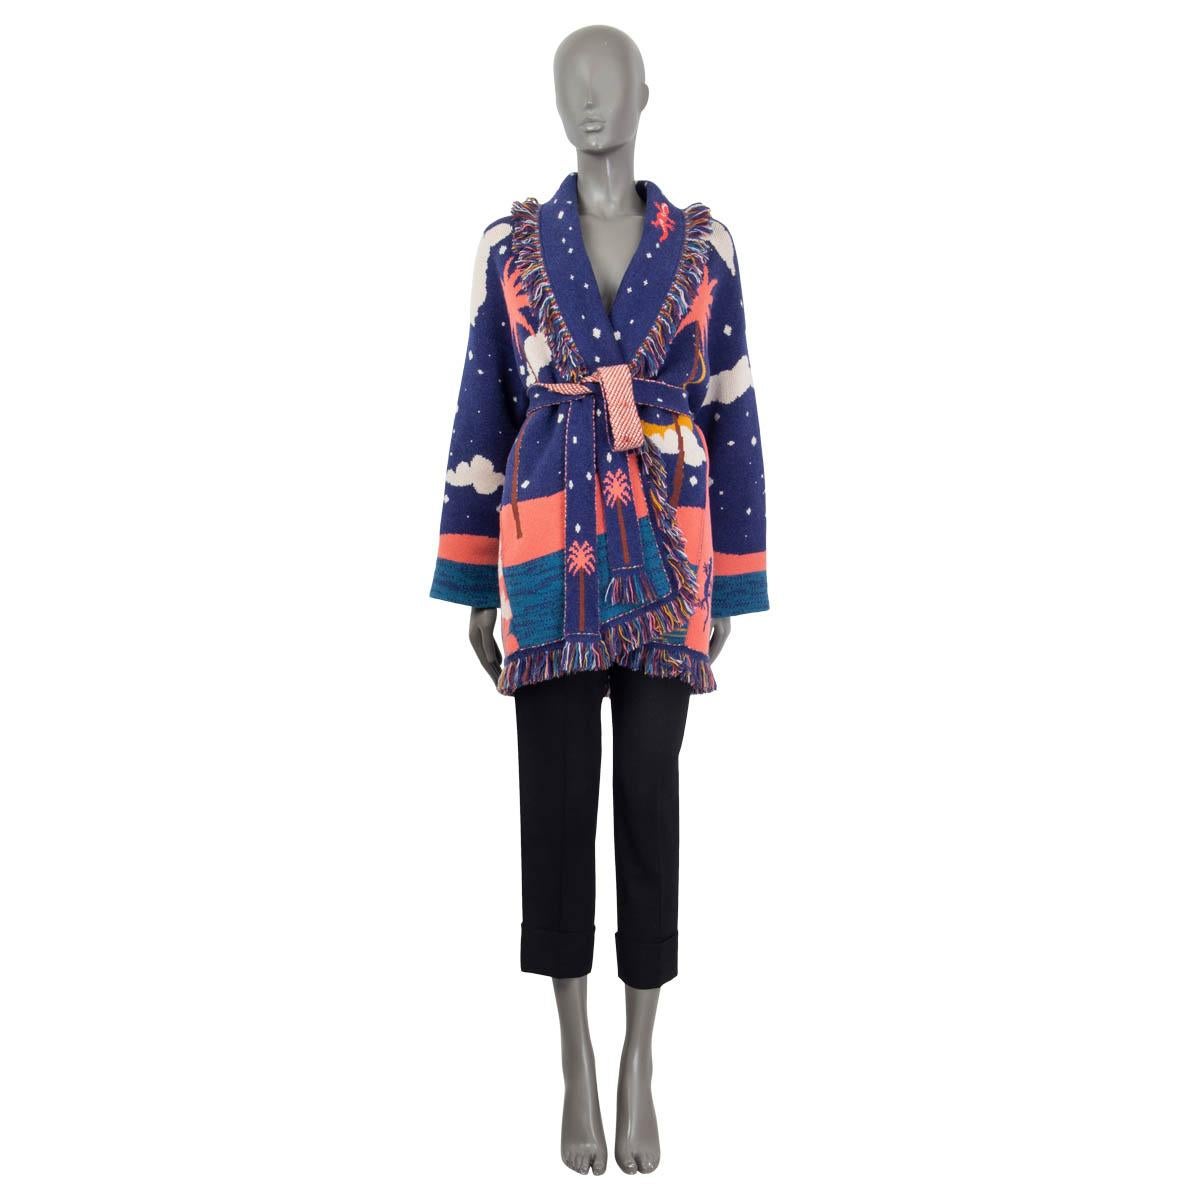 100% authentic Alanui sun, moon and galaxy knitted jacquard cardigan in blue, pink, white, brown, mustard and petrol cashmere (100%). Features a fringed shawl collar, drop shoulder and two slit pockets on the side. Comes with matching belt strap.